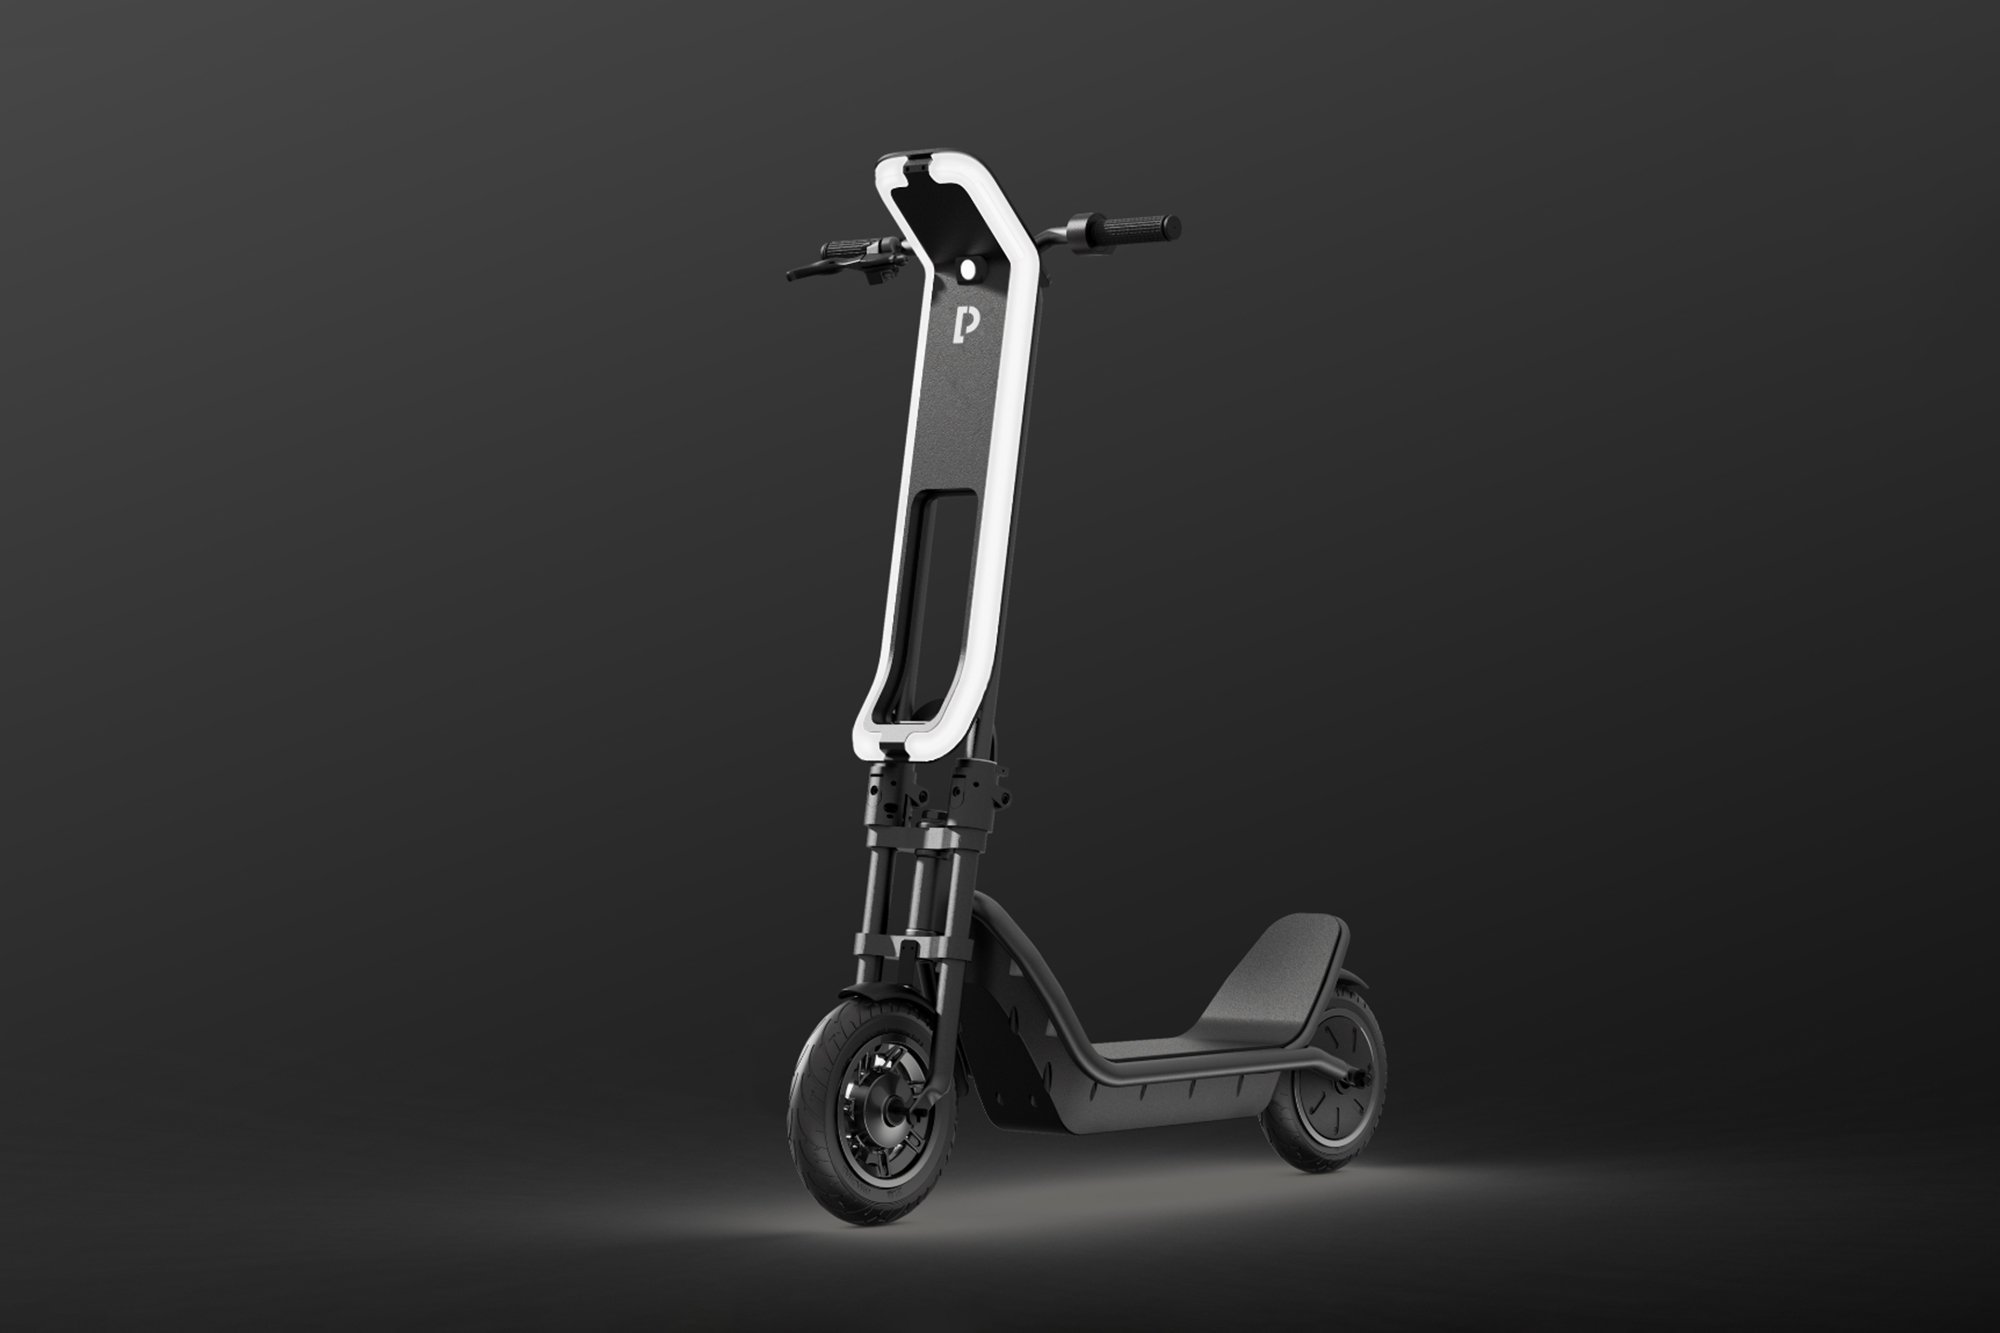 The minimal design Plume's electric scooter